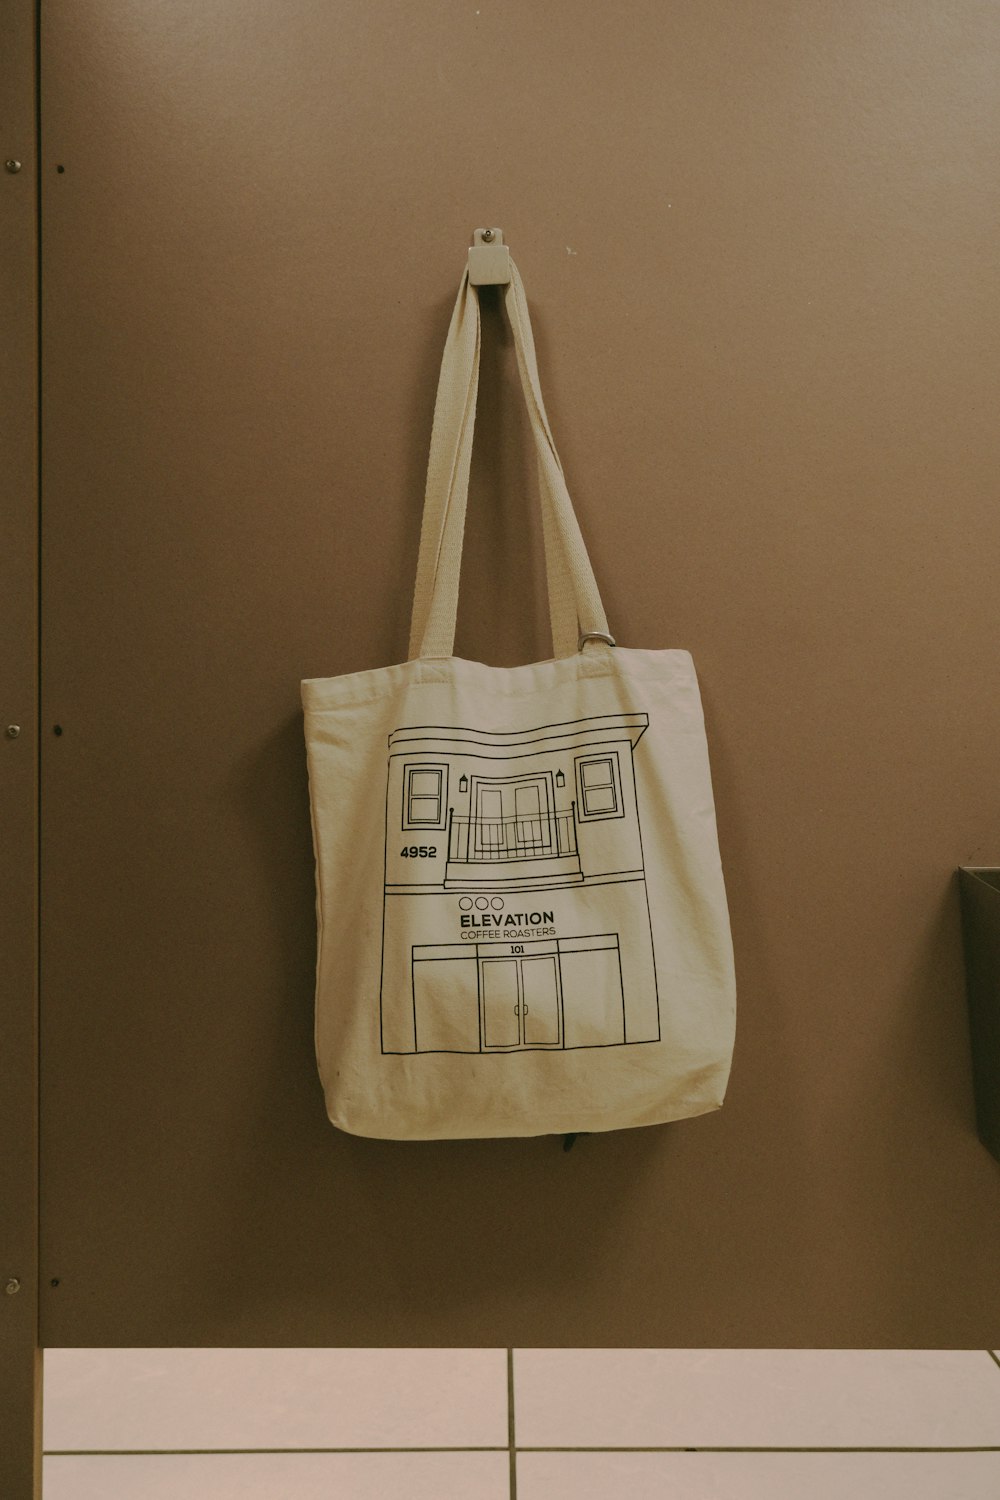 a canvas bag hanging on a wall